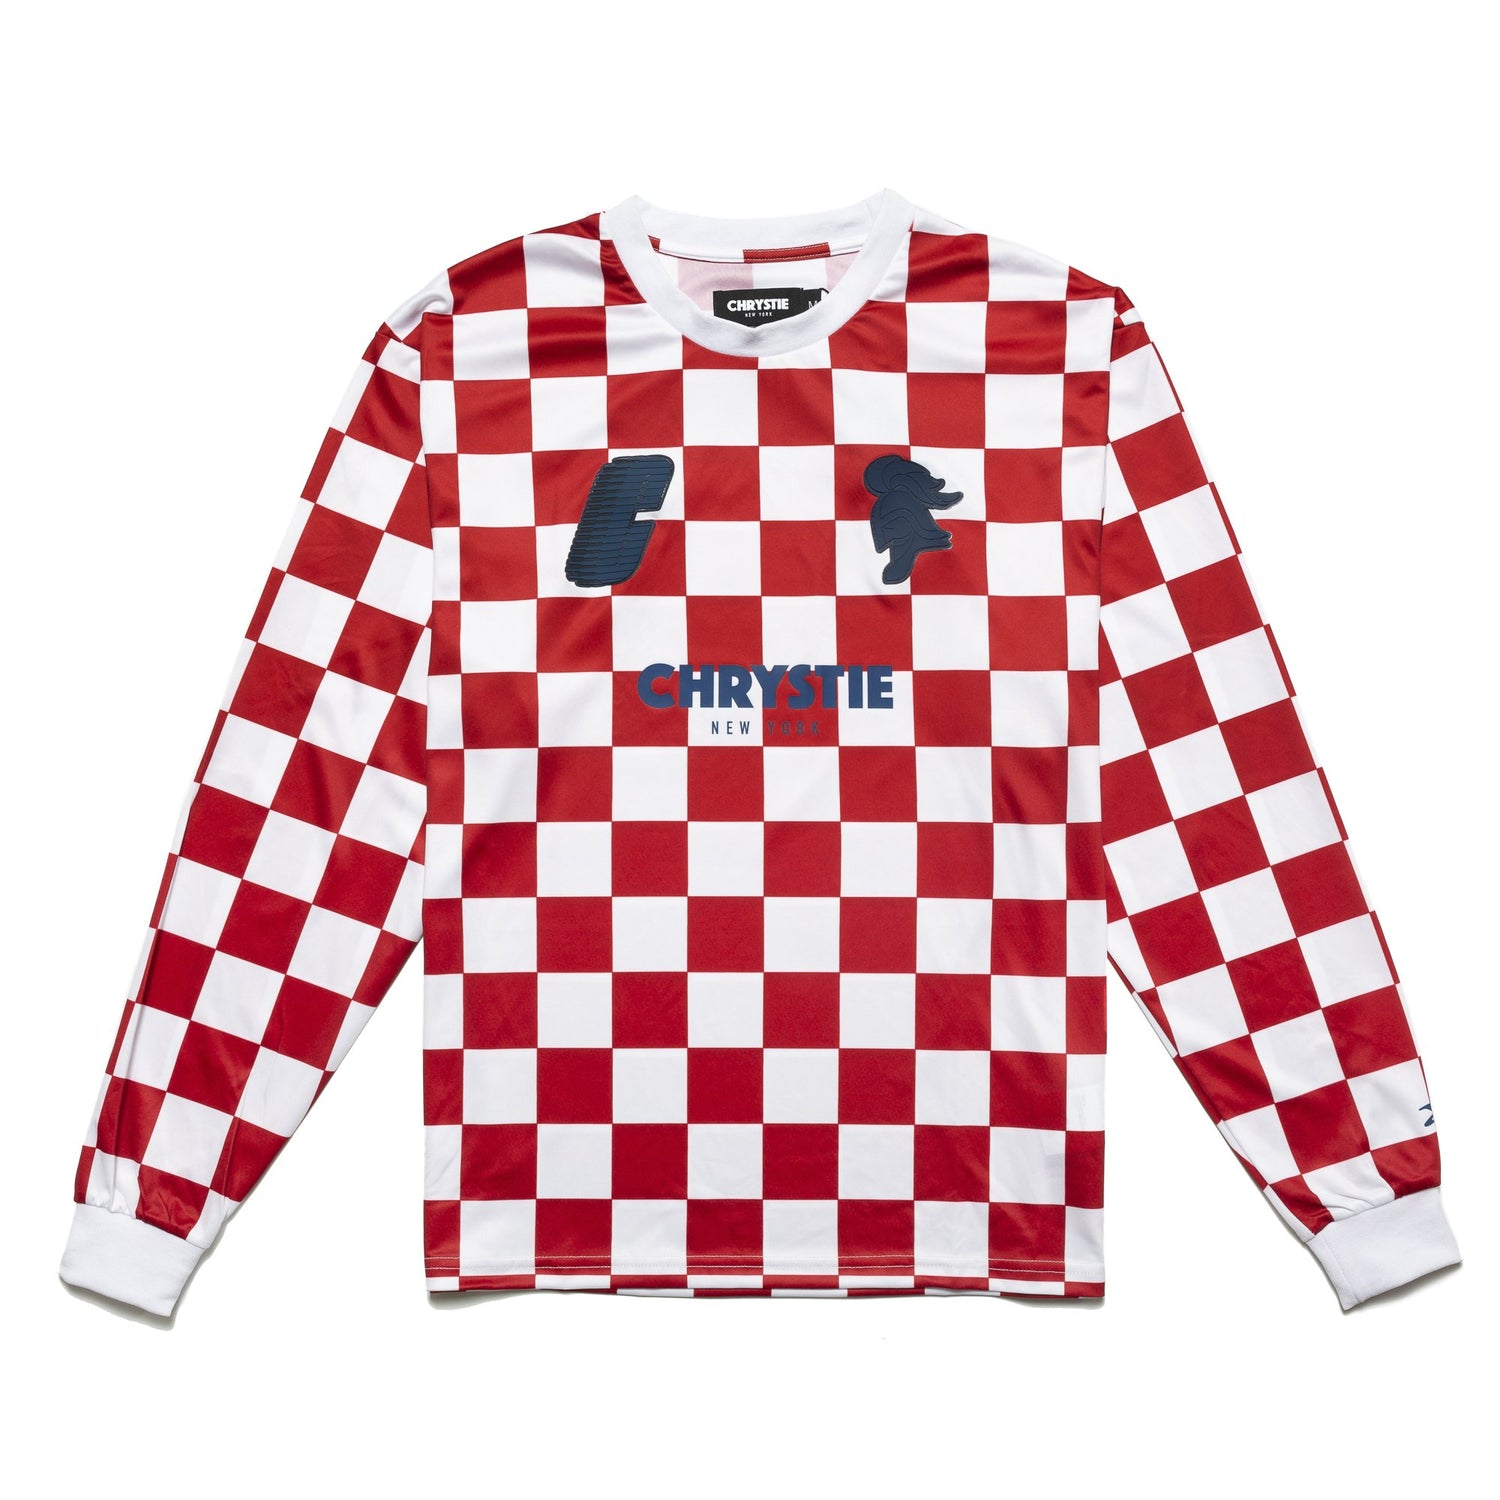 Chrystie NYC x Soho Warriors - SWFC 10th Anniversary Soccer Jersey / Home Color